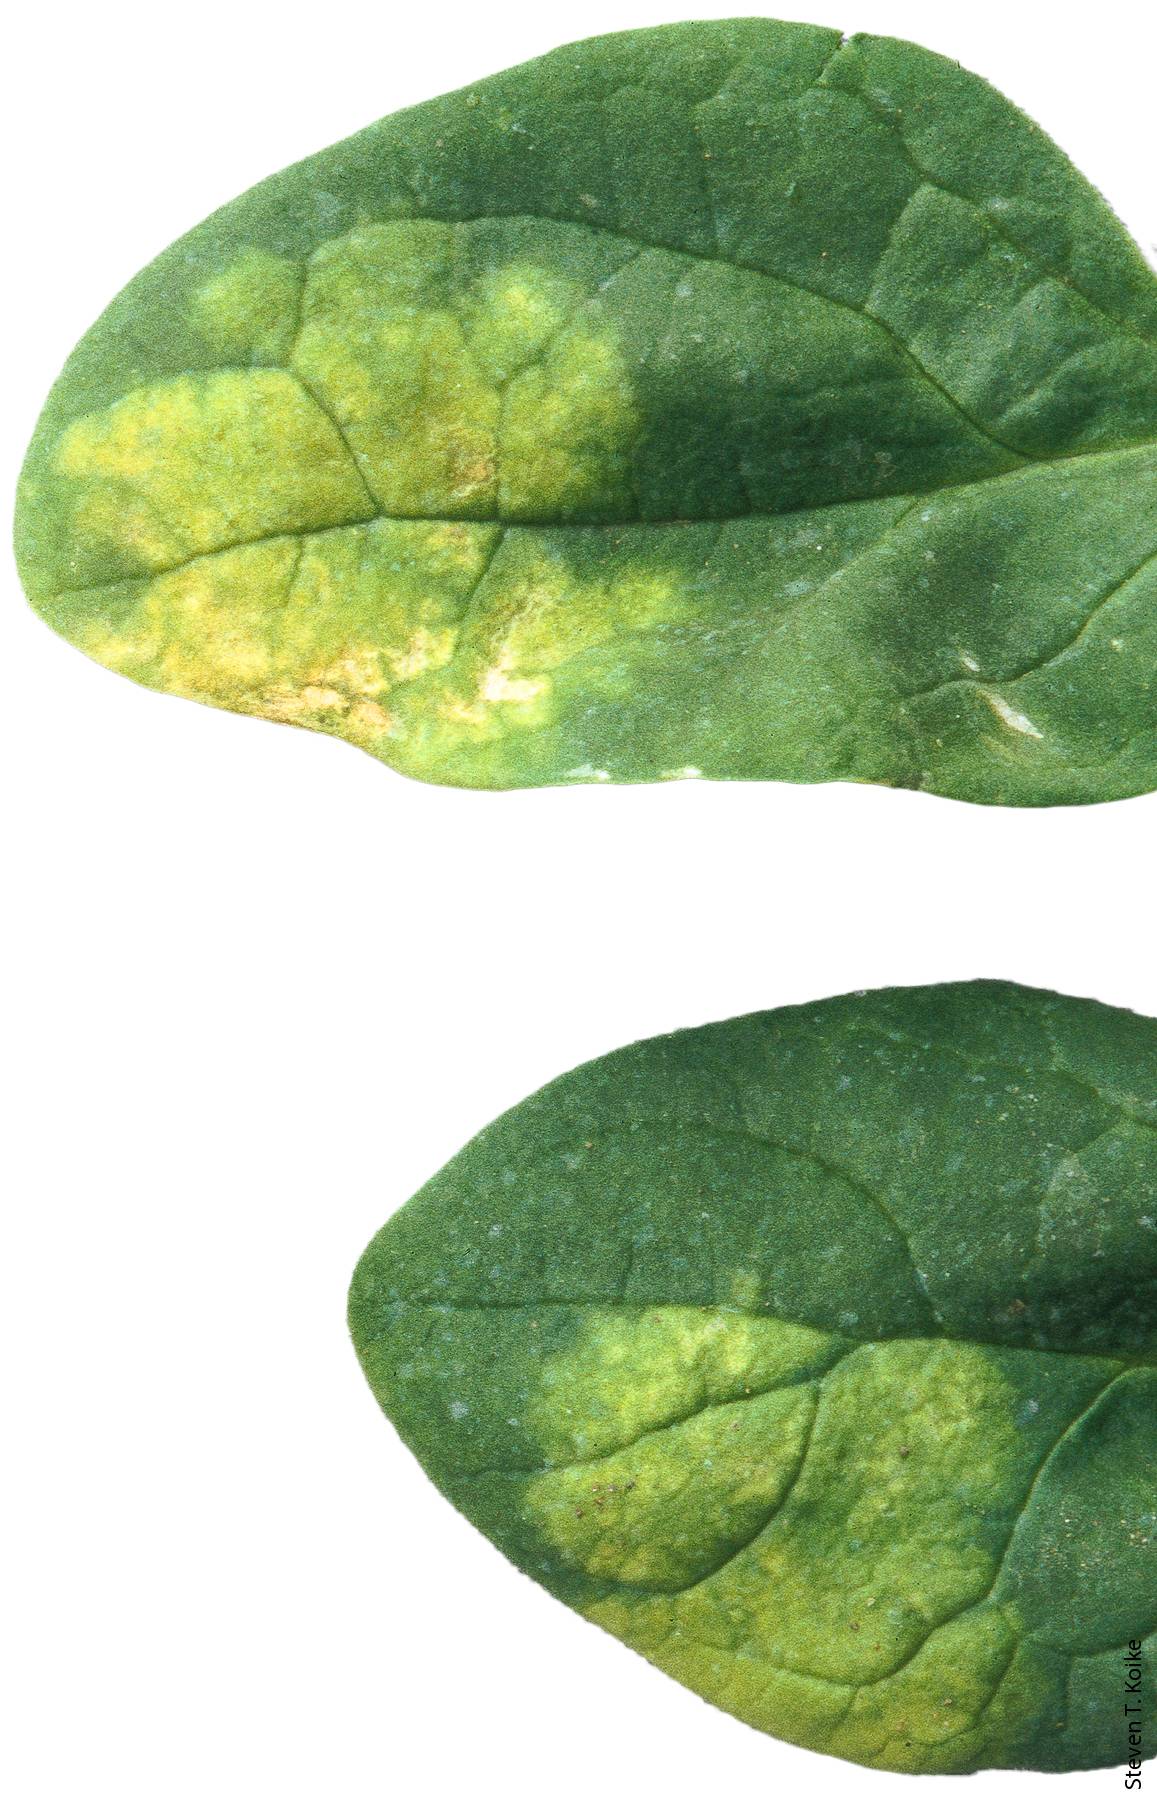 The new race of downy mildew stains spinach leaves with bright yellow blotches.